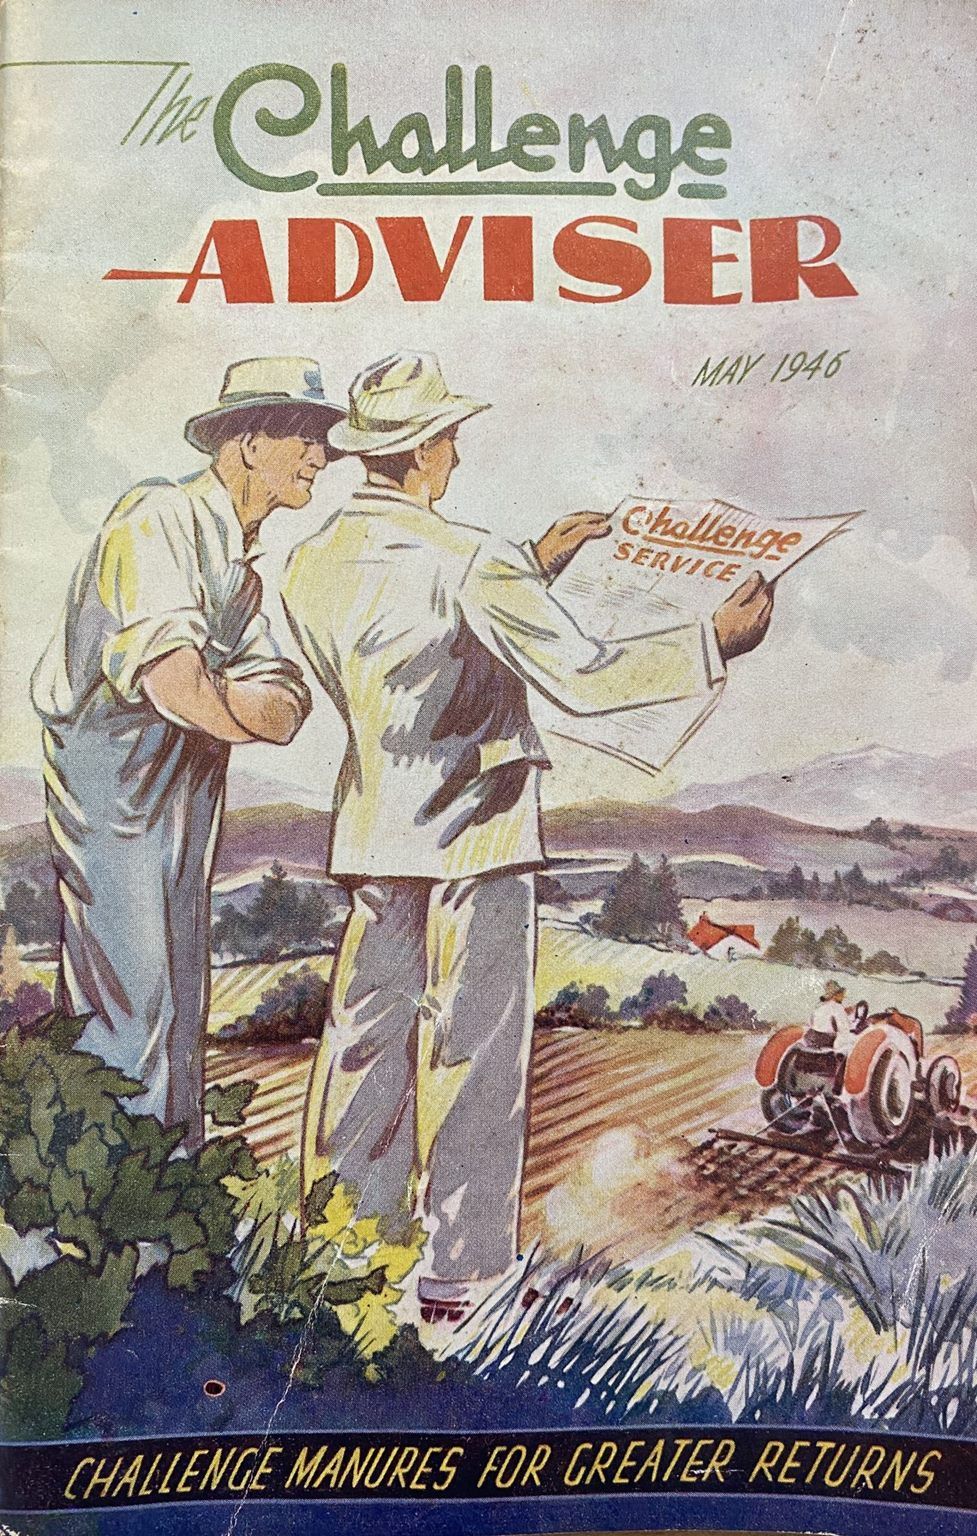 FARMING BULLETIN: The Challenge Advisor - Manures for Greater returns, May 1946